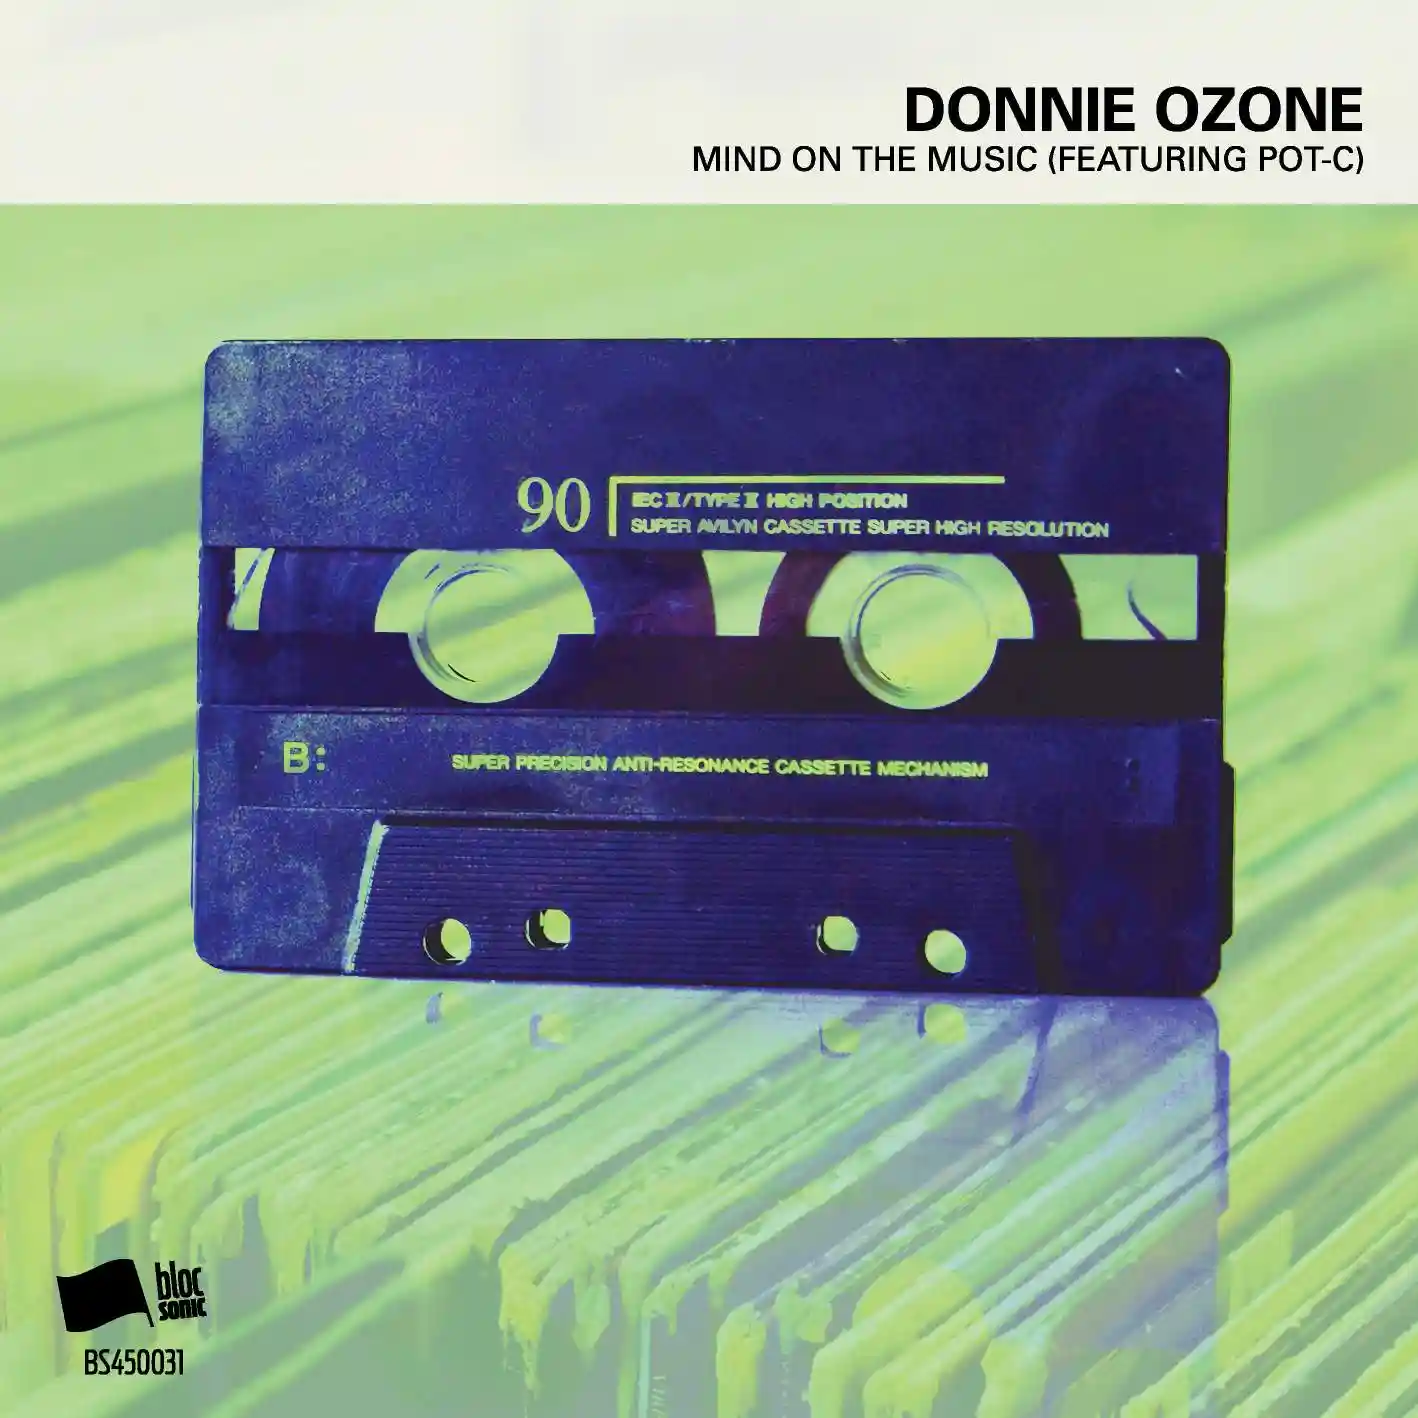 Album cover for “Mind On The Music (Featuring Pot-C &amp; SKOL)” by Donnie Ozone